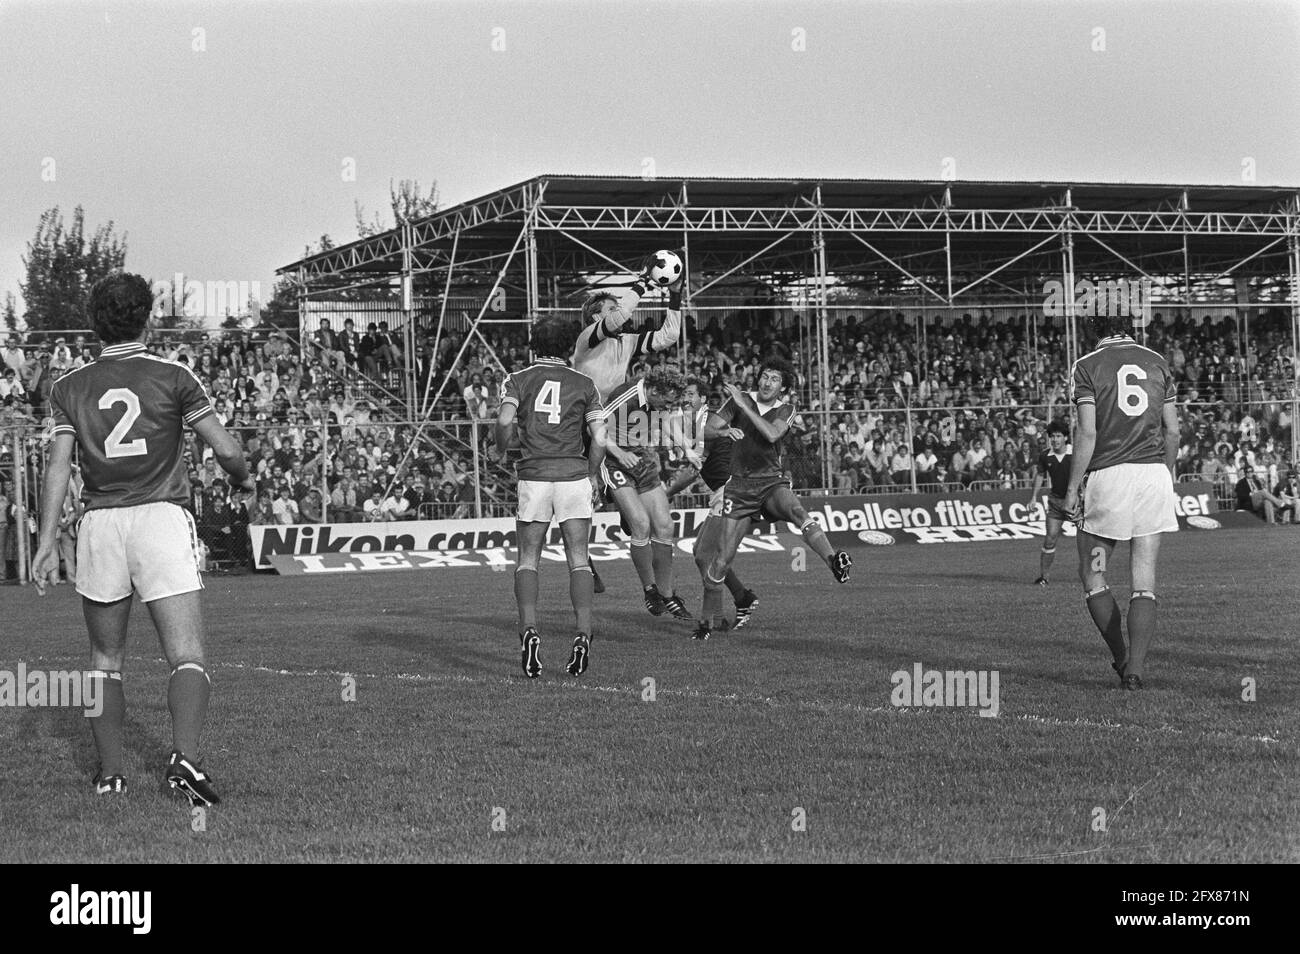 AZ 67 player Kees Kist (center) in duel with goalkeeper Van Breukelen (Utrecht) during the soccer match FC Utrecht-AZ 67, 29 August 1981, sports, soccer, soccer players, soccer fields, matches, The Netherlands, 20th century press agency photo, news to remember, documentary, historic photography 1945-1990, visual stories, human history of the Twentieth Century, capturing moments in time Stock Photo